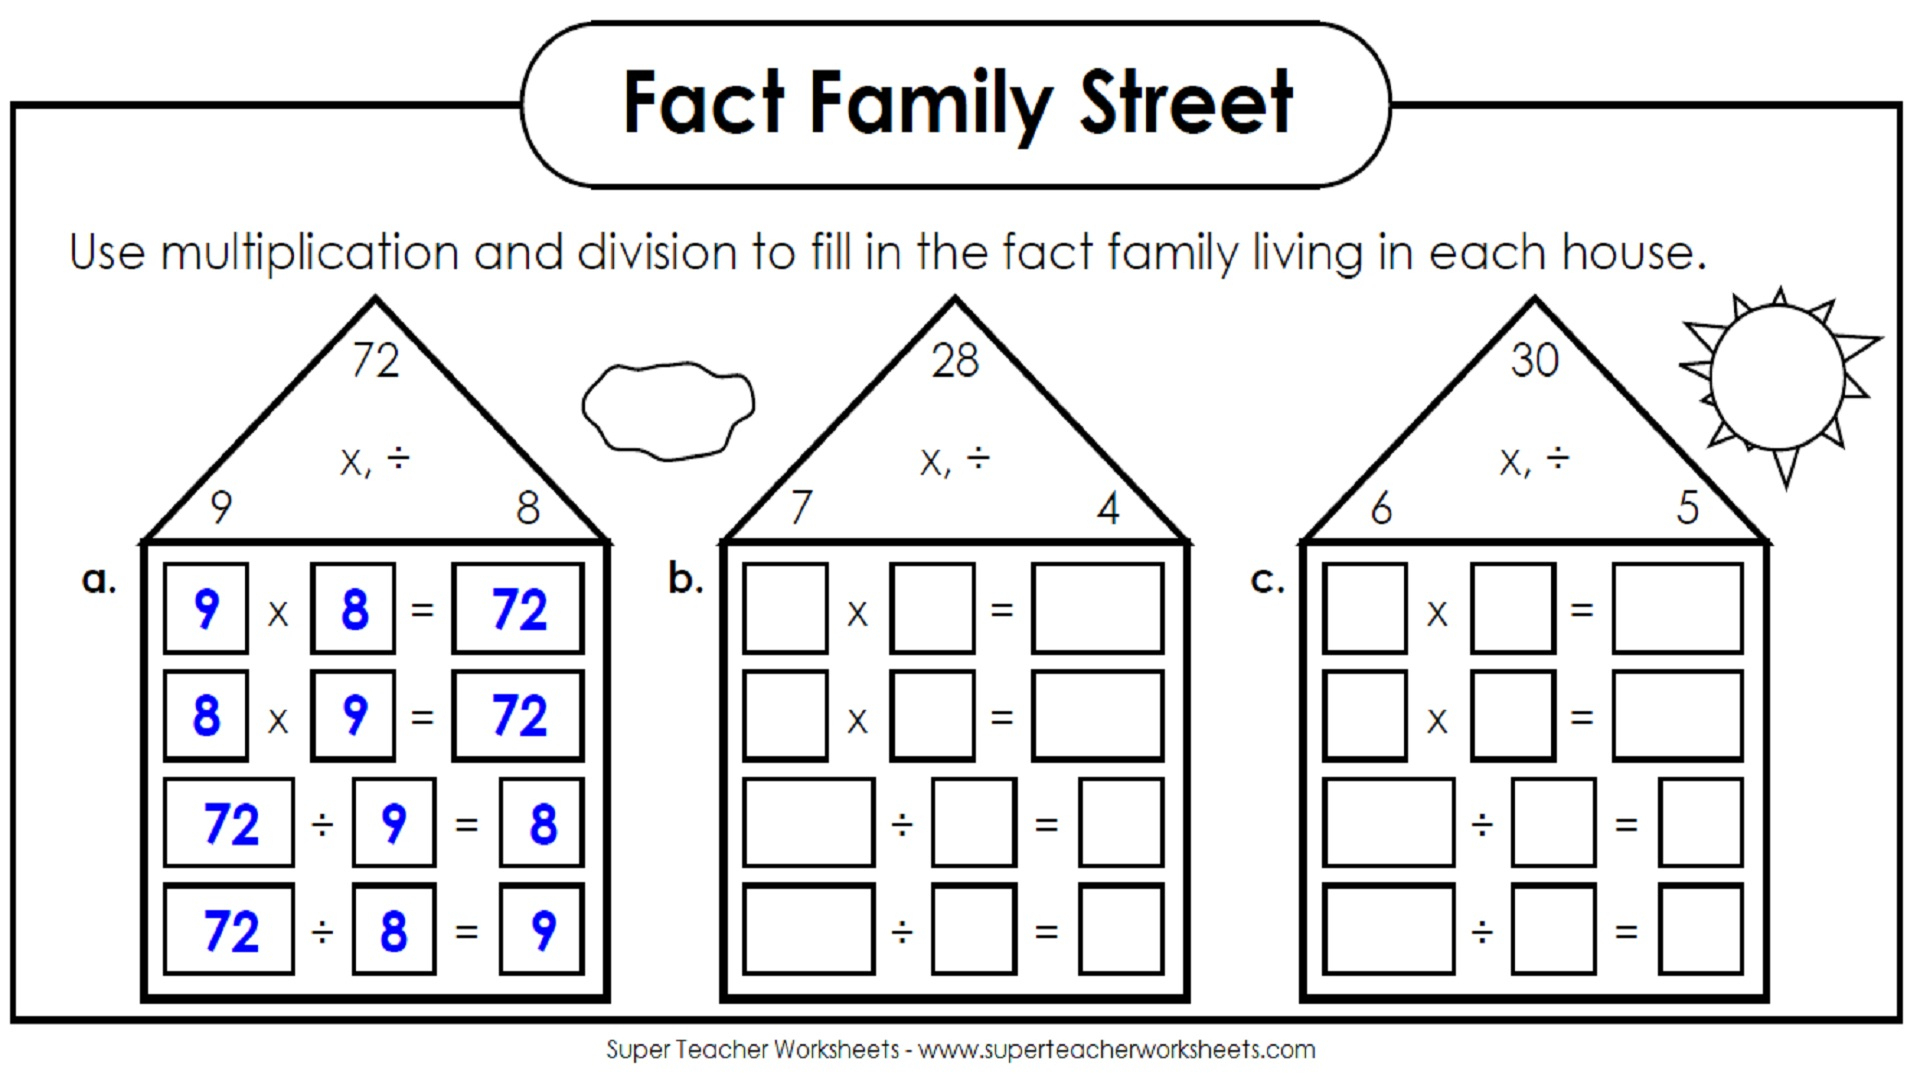 Free Printable Multiplication Division Fact Family Worksheets Forms Worksheets Diagrams